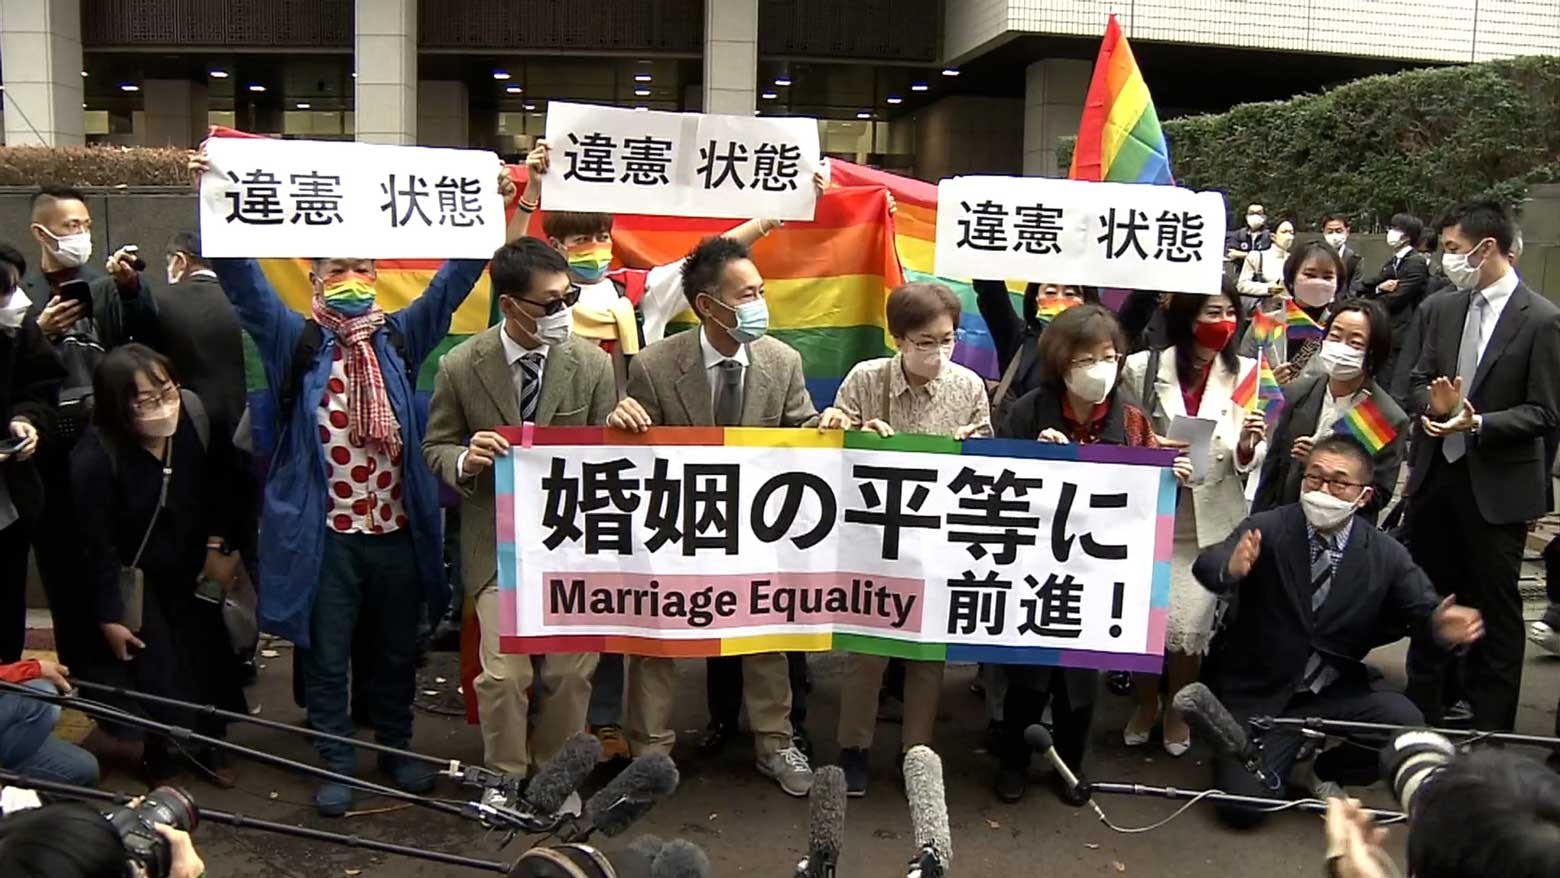 Tokyo court upholds same-sex marriage ban but also offers hope for equal rights